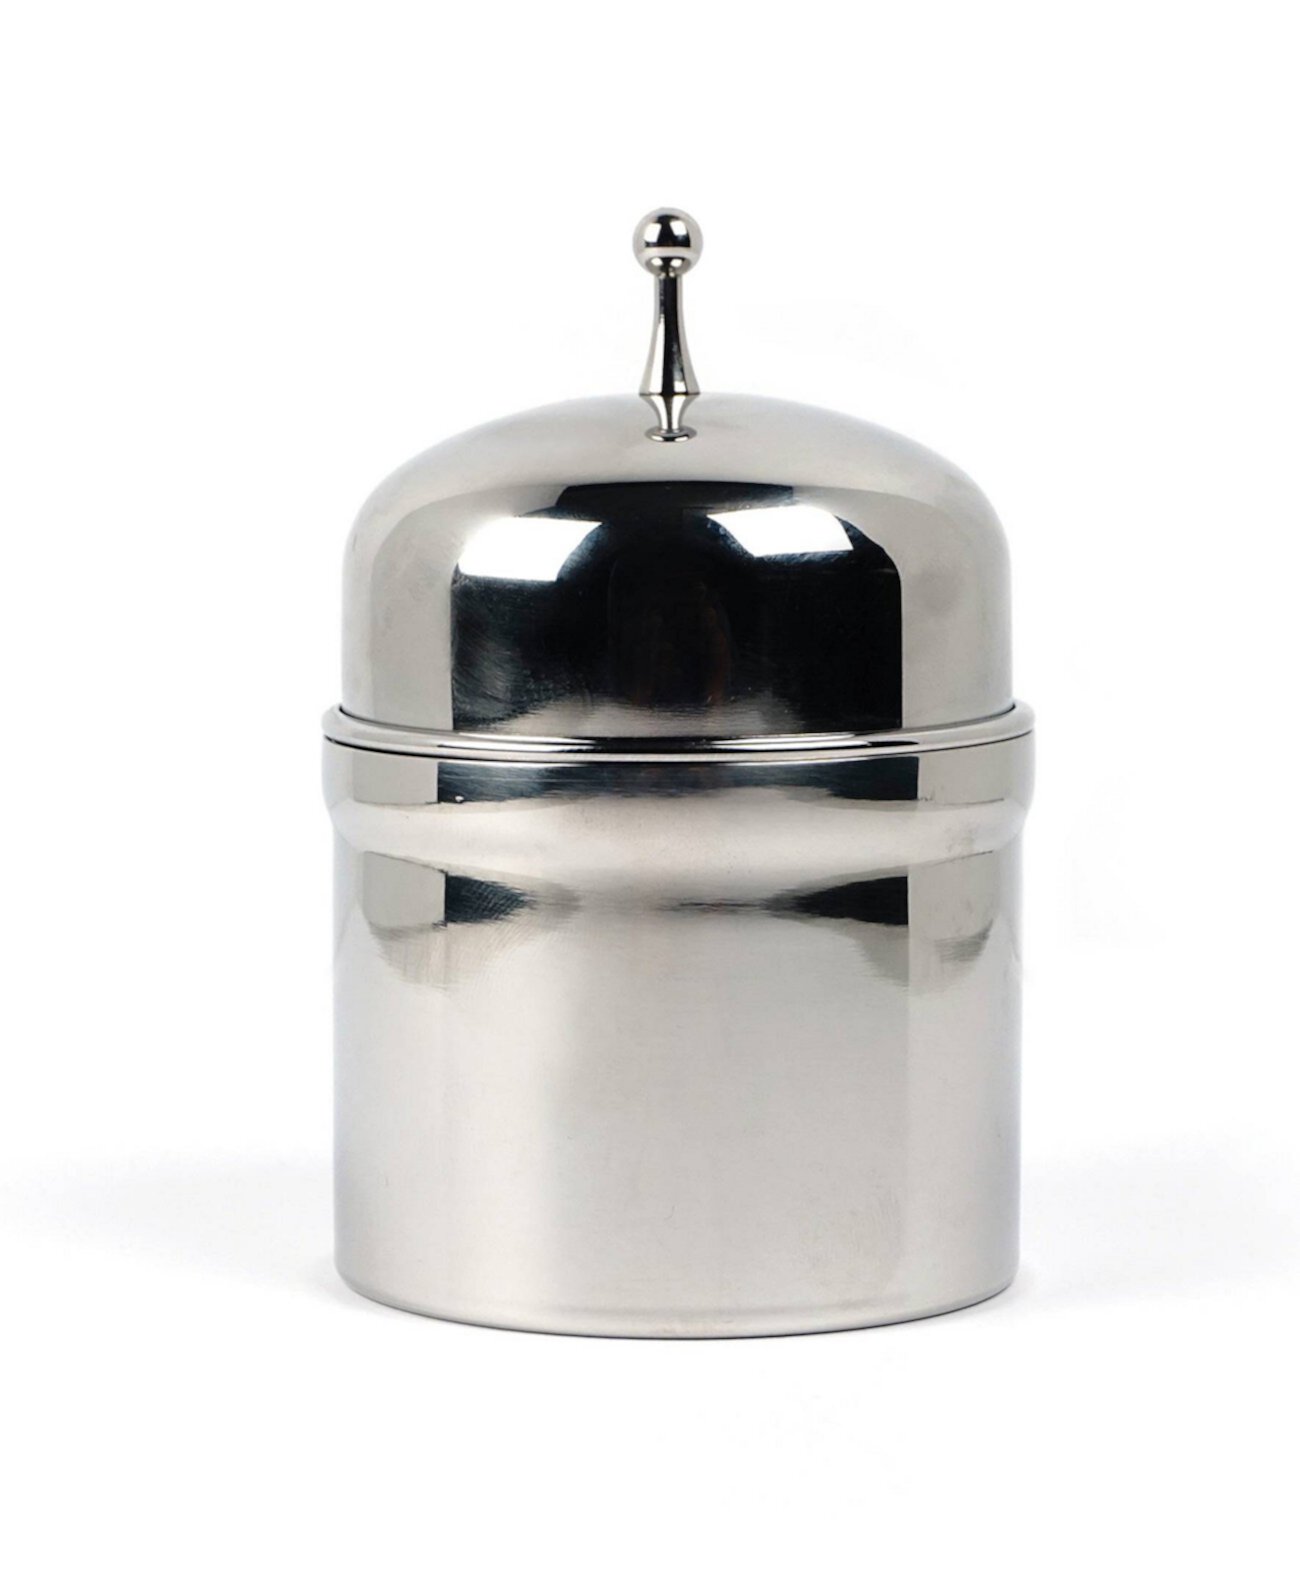 Stainless Steel 3" x 3" x 4" Floating Spice Ball RSVP International